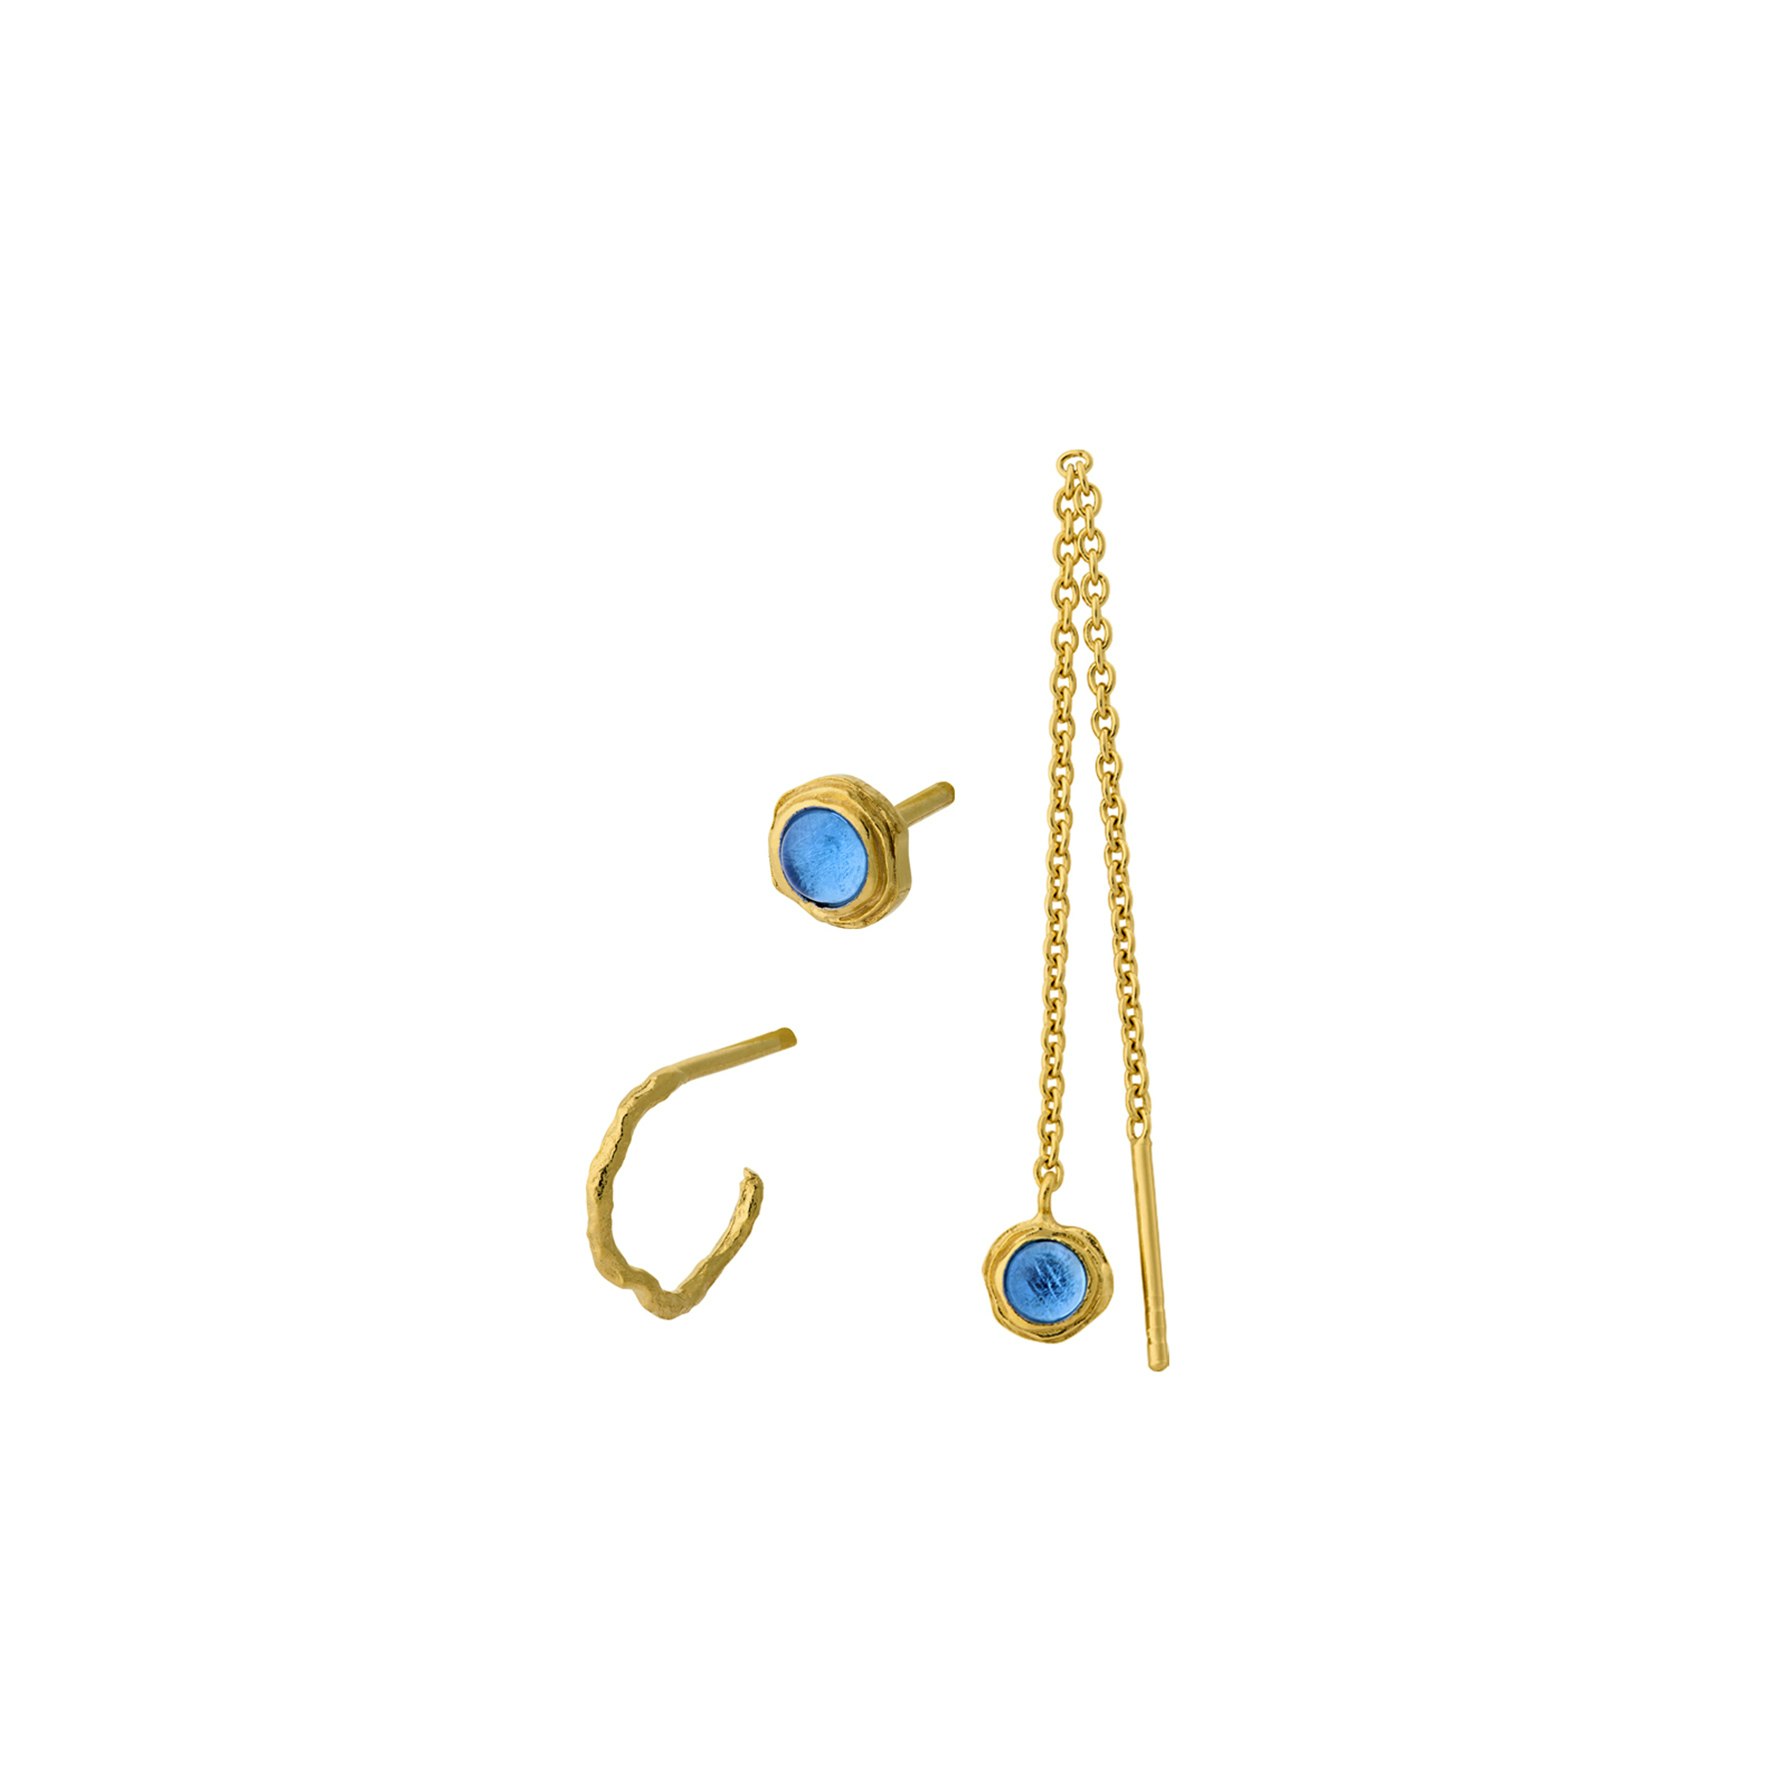 Blue Hour Earring Box from Pernille Corydon in Goldplated Silver Sterling 925